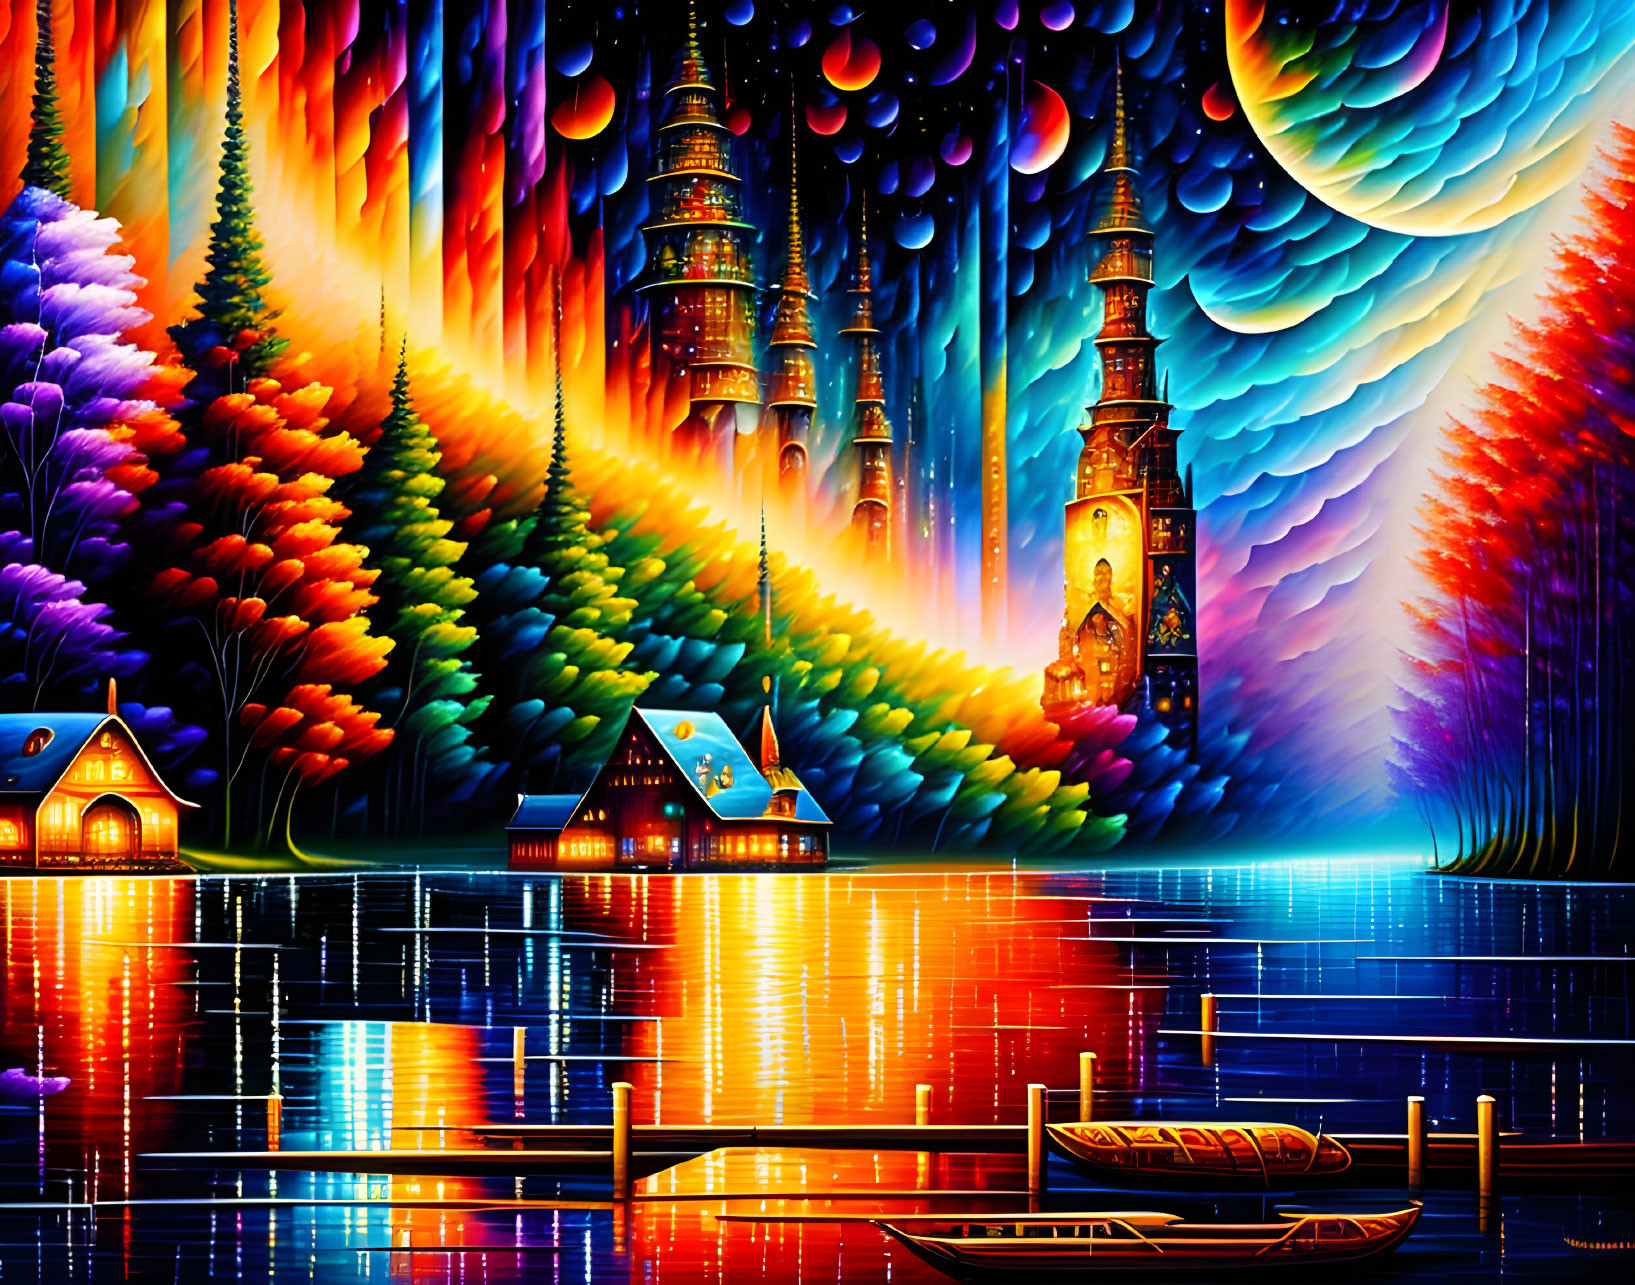 Colorful Fantasy Landscape with Castle, Boat, and Illuminated Houses